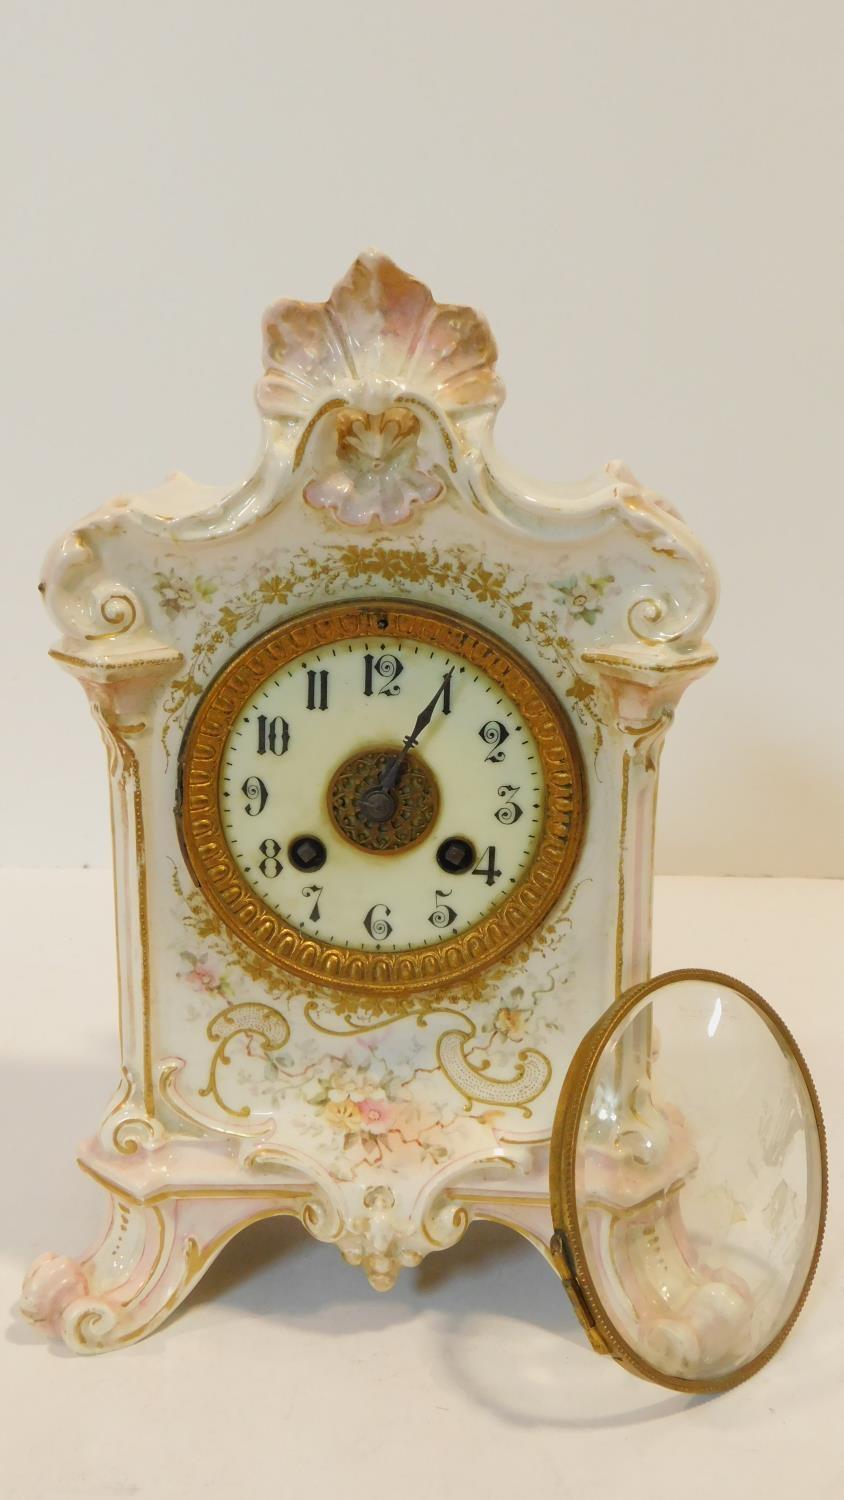 A porcelain hand painted antique gilded mantel clock with floral details and white enamel dial